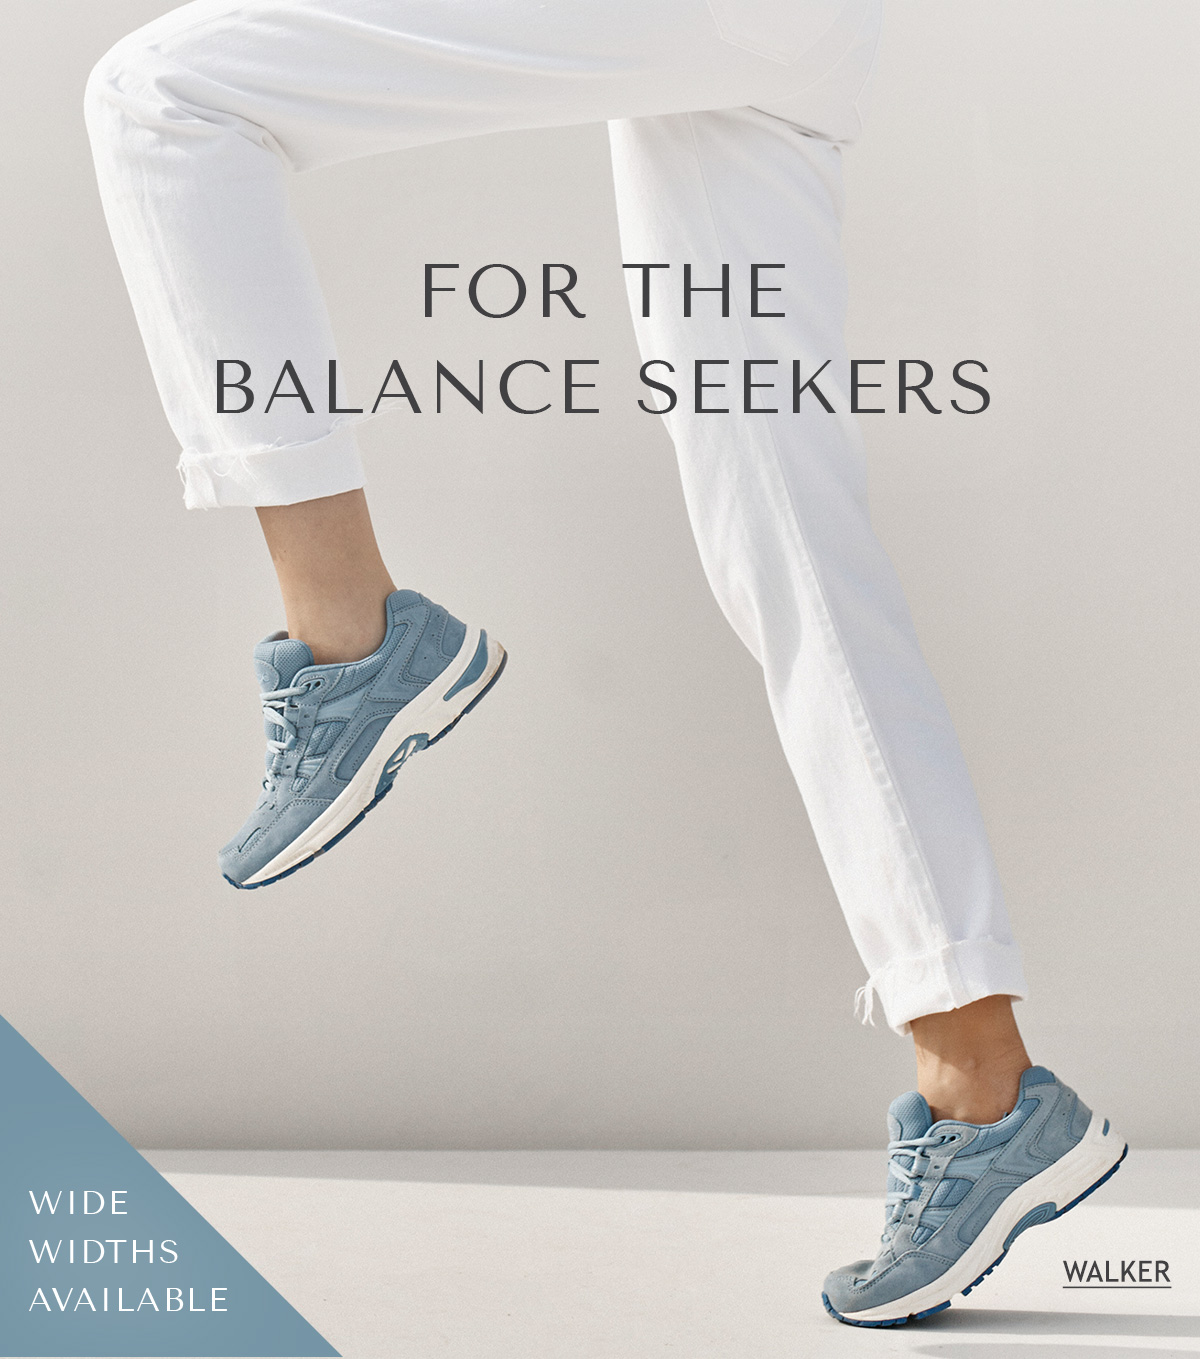 FOR THE BALANCE SEEKERS – Wide Widths Available – Shop Women's Walker Classic FORE HiS BALANCE SEEKERS WIDE WIDTHS AVAILABLE 